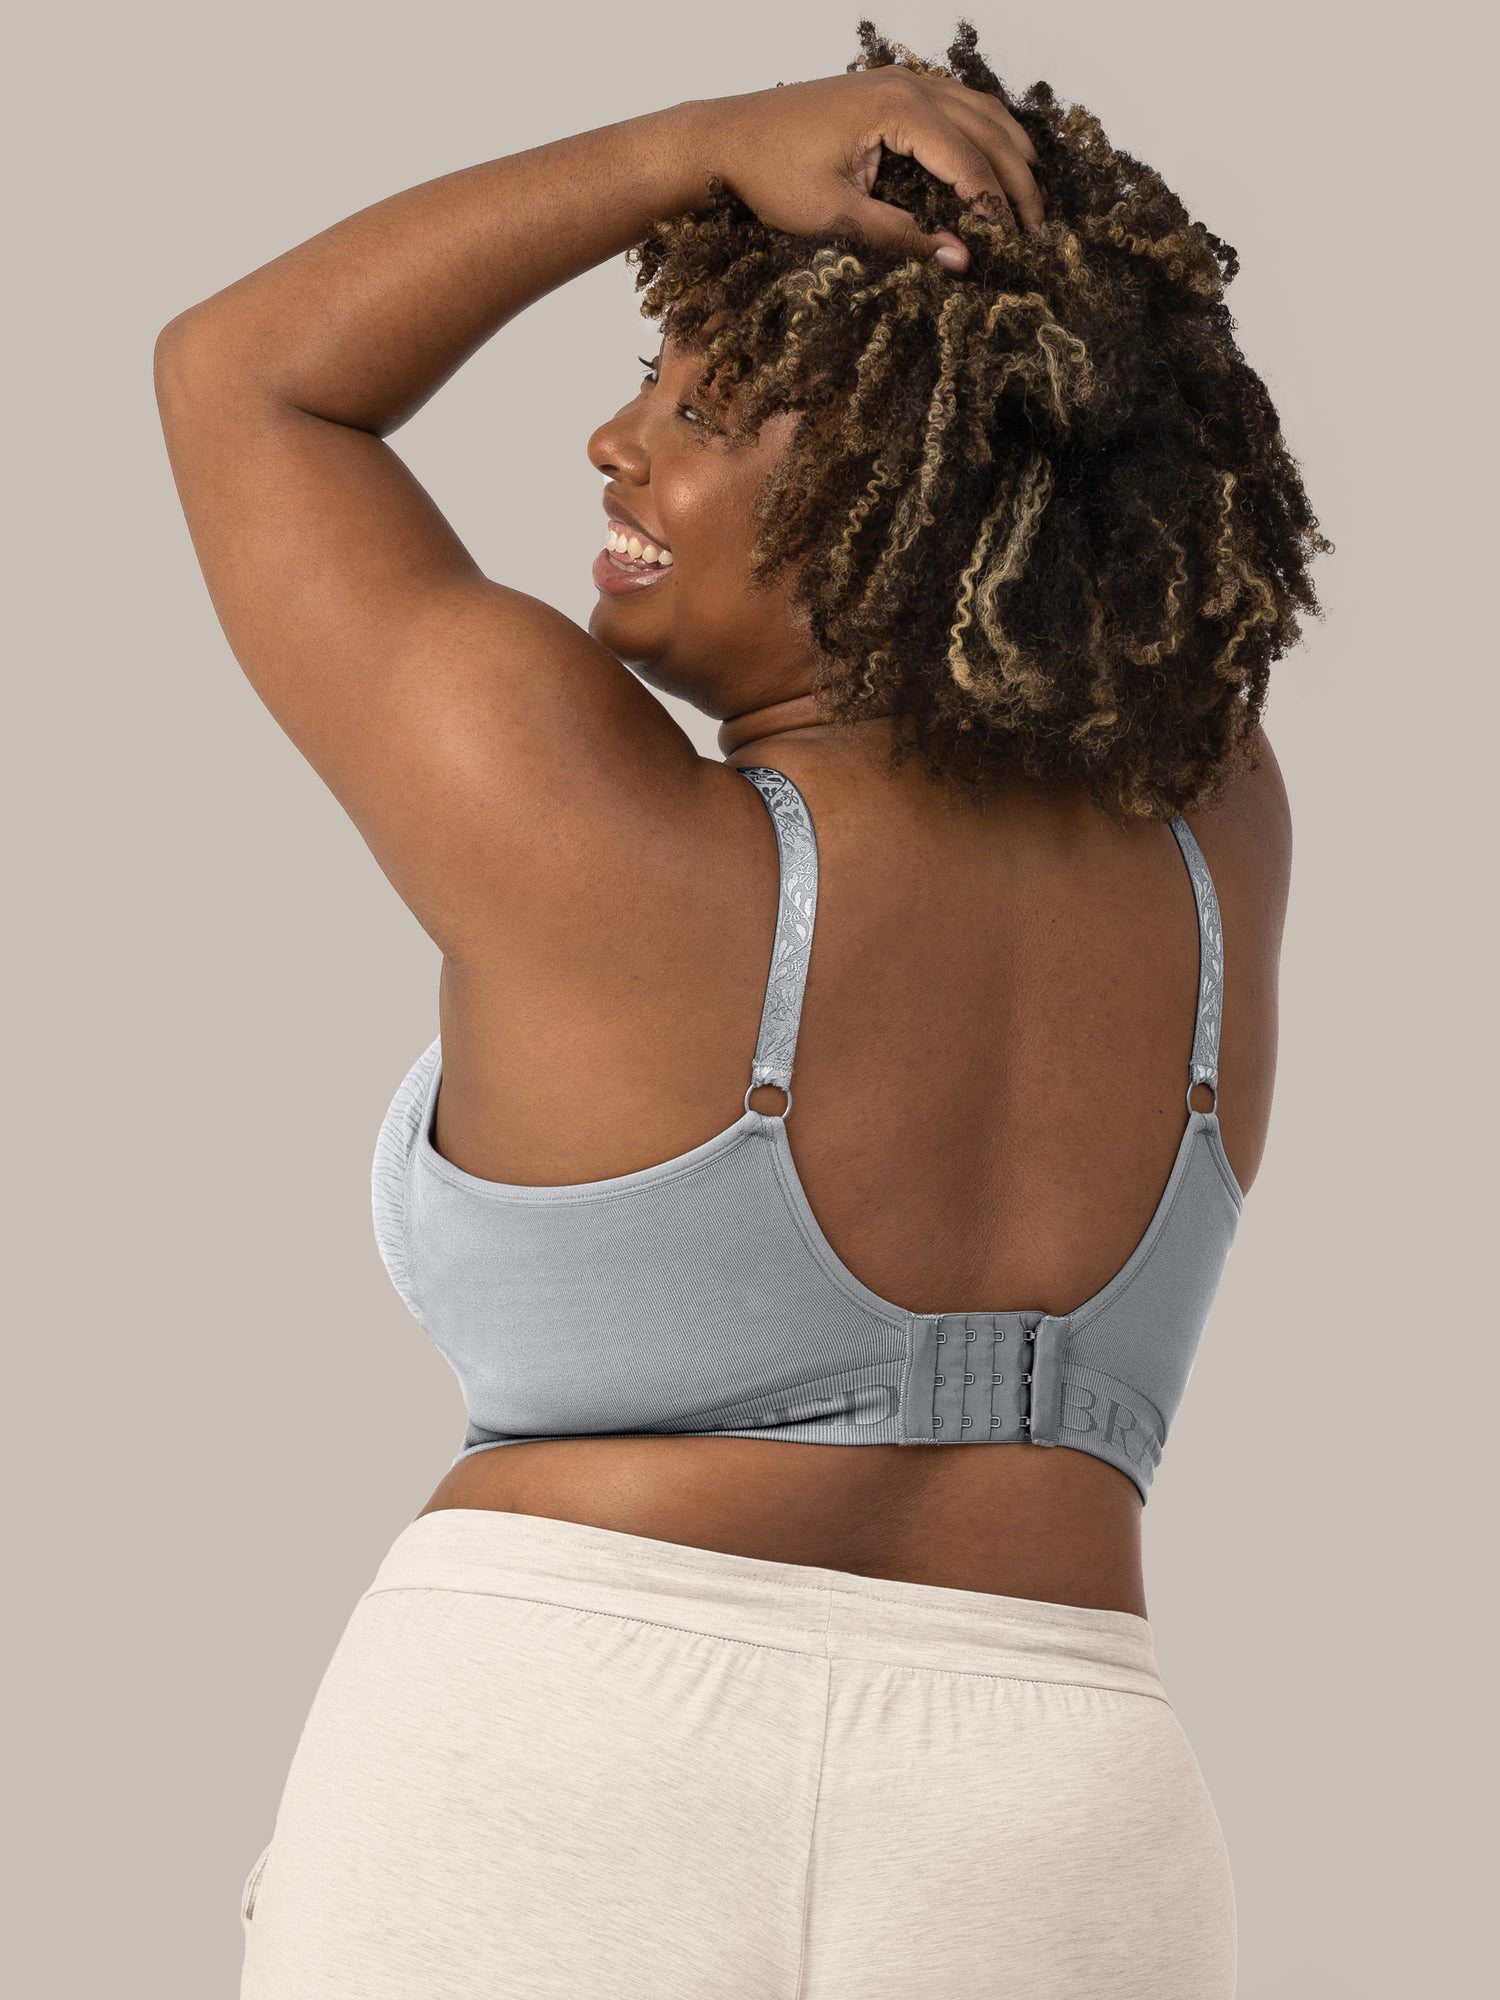 The back of a model wearing the Sublime® Hands-Free Pumping & Nursing Bra in Grey